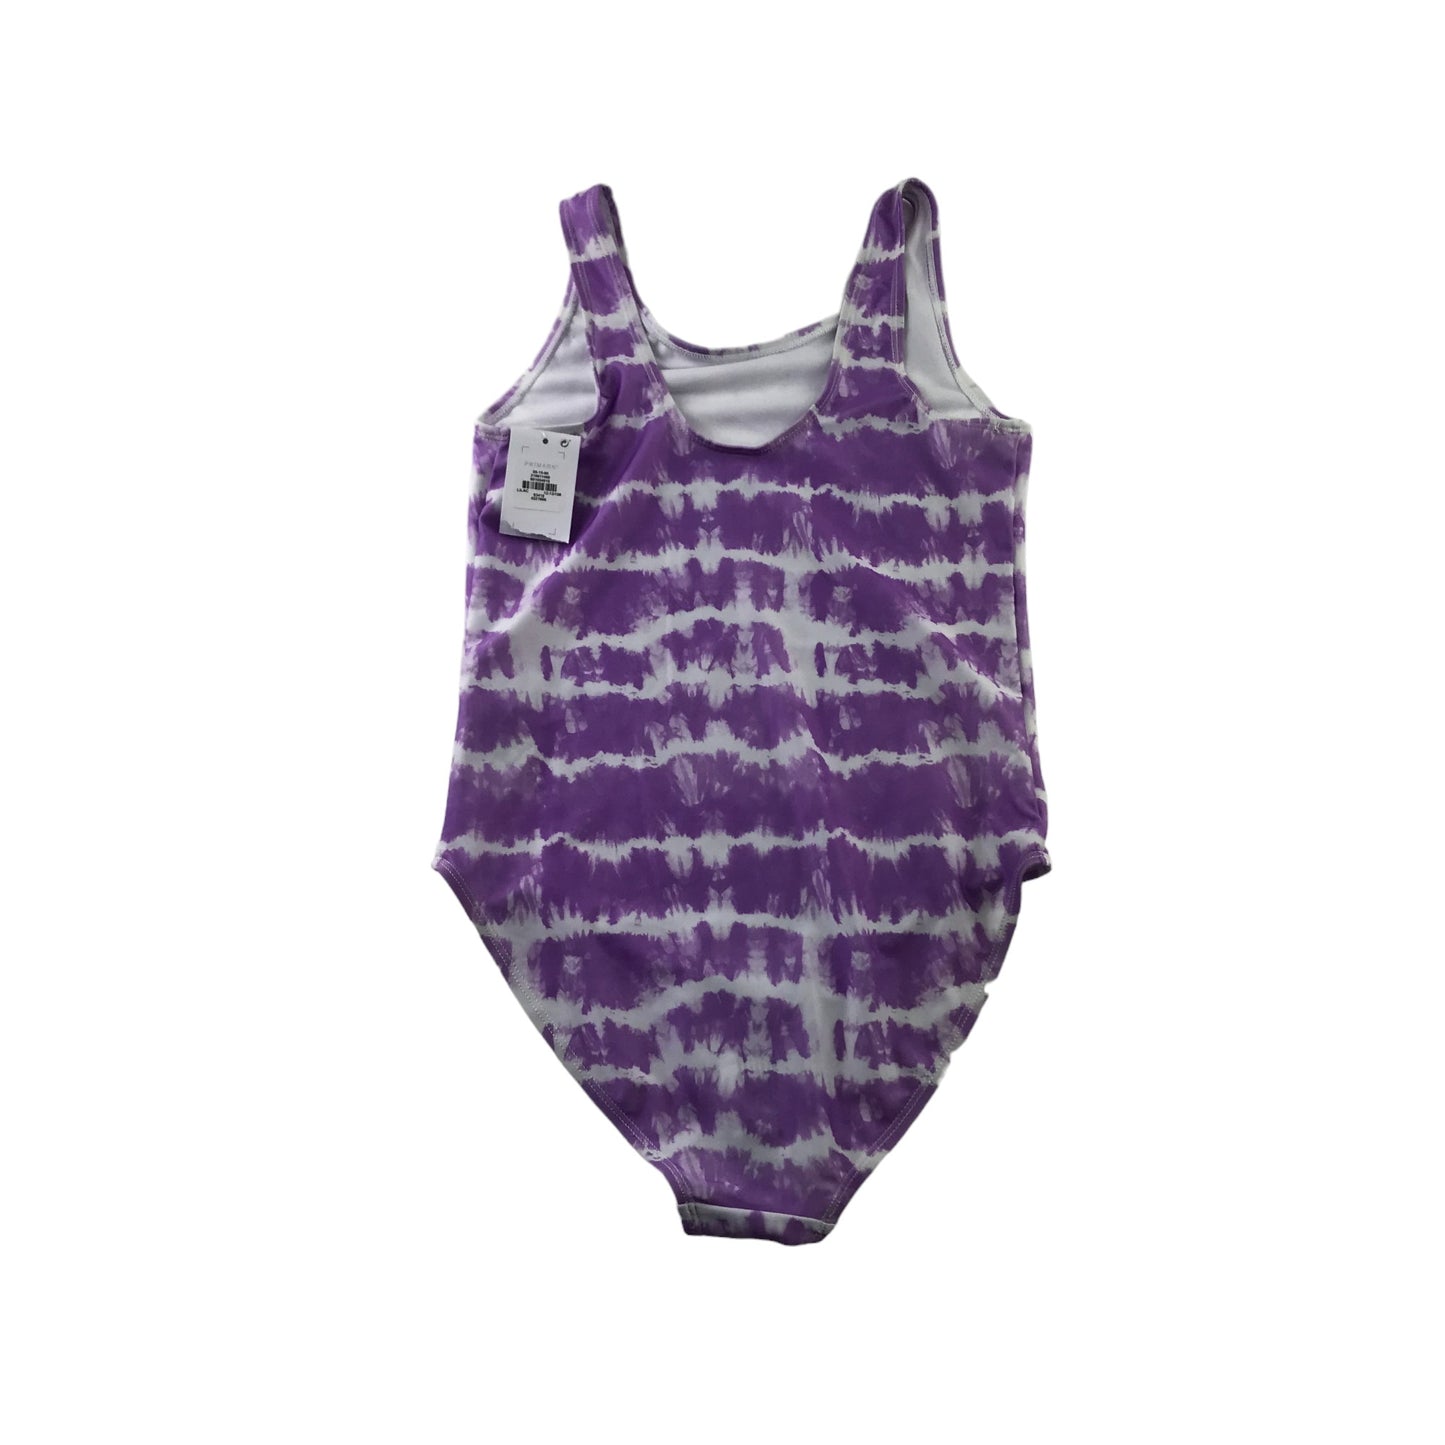 Primark Swimsuit Age 12 Lilac and White Tie Dye Los Angeles One Piece Cossie